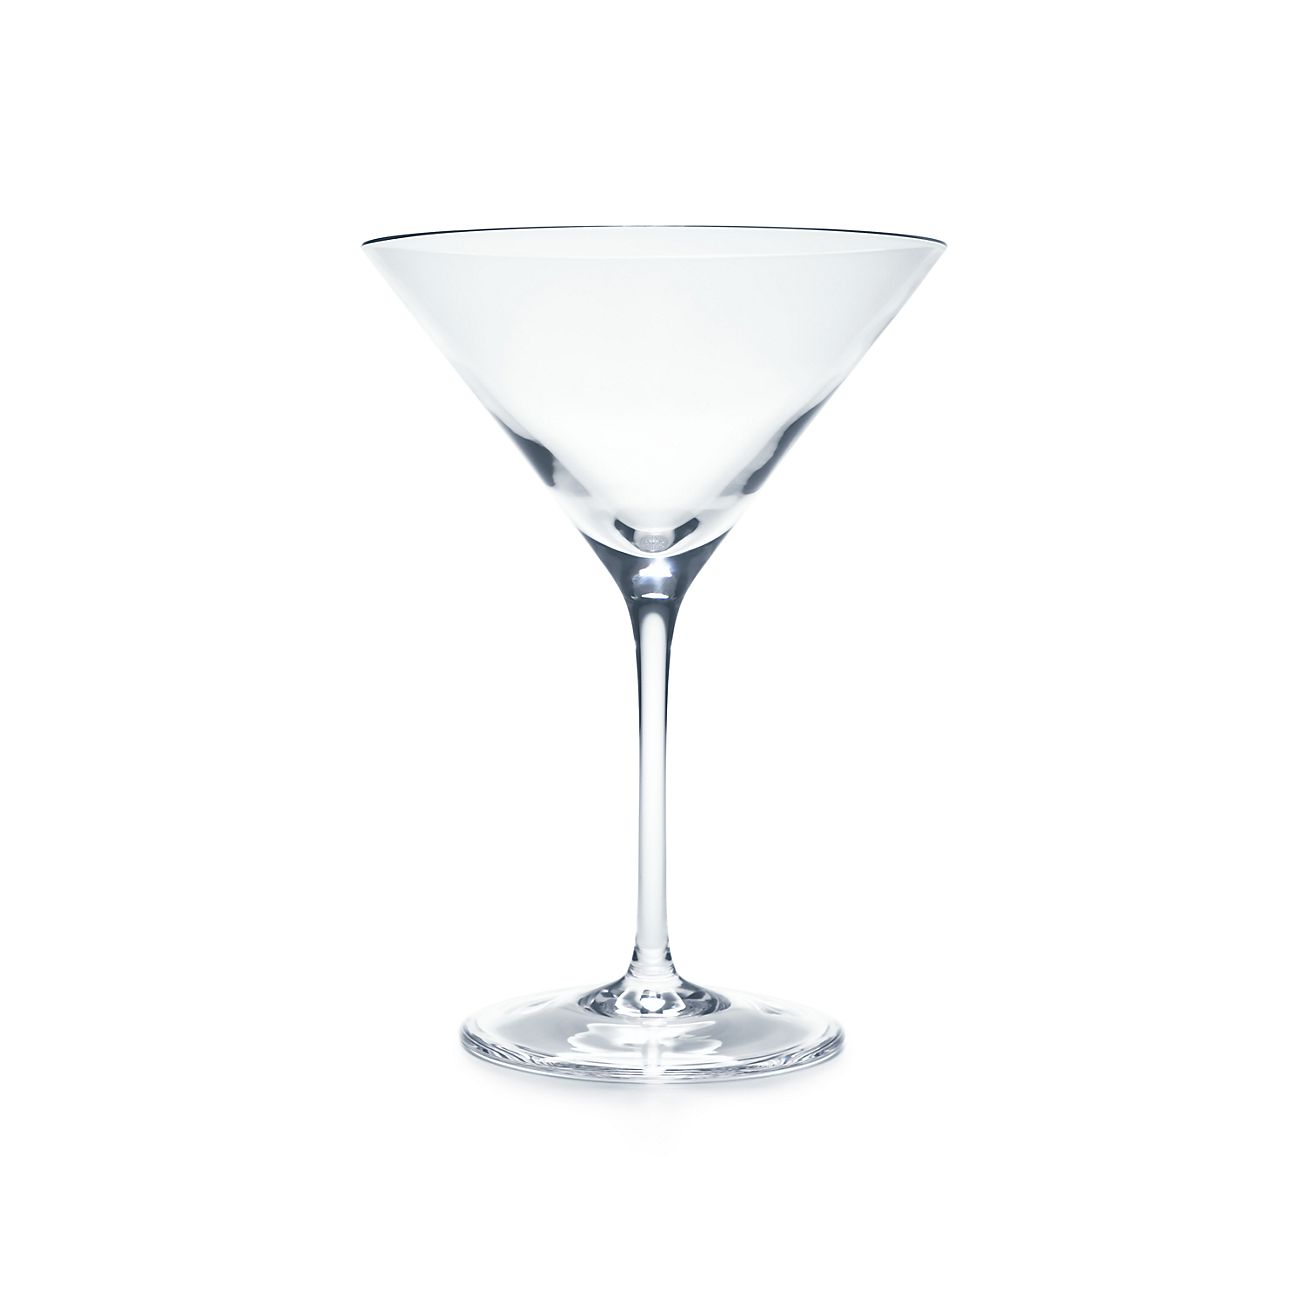 Martini glass in handmade, mouth-blown 